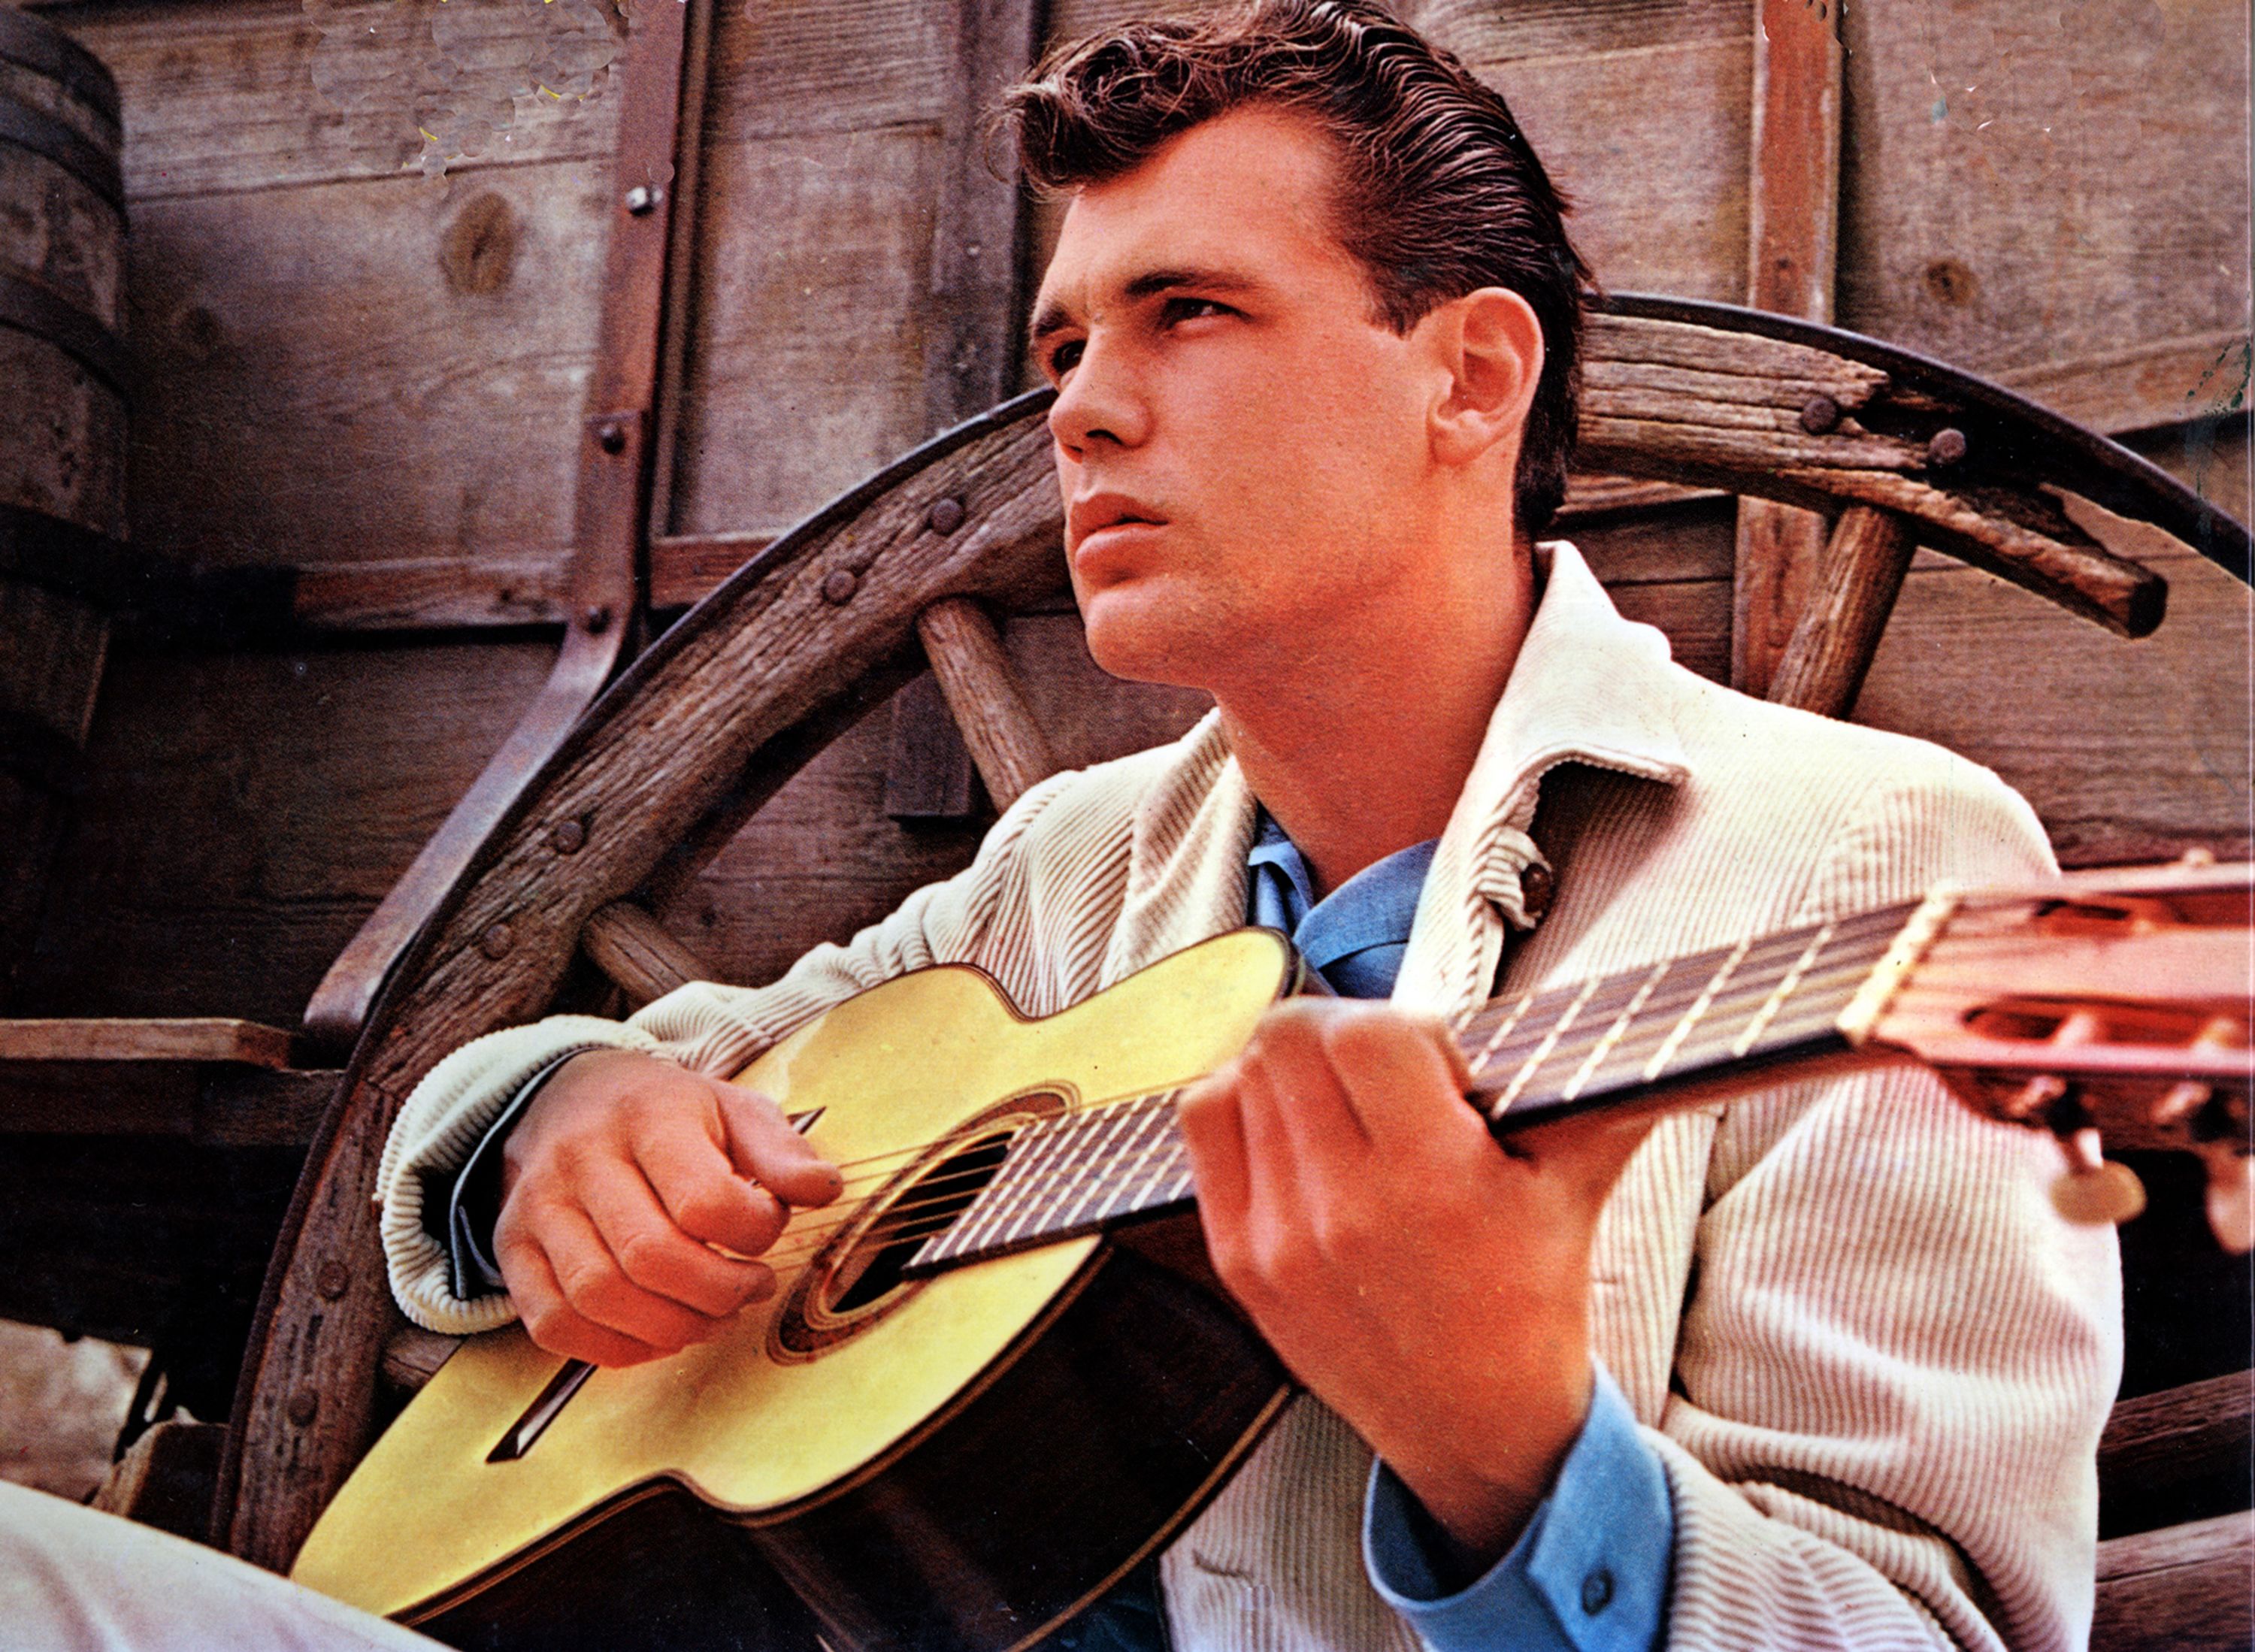 Guitarist <a href="https://edition.cnn.com/2024/05/02/entertainment/duane-eddy-death-scli-intl/index.html" target="_blank">Duane Eddy</a>, best known for twangy riffs on hits such as "Rebel Rouser" and "Cannonball," has died at the age of 86.<br />A representative for Eddy confirmed on Wednesday, May 1, that he had passed away, surrounded by his family.